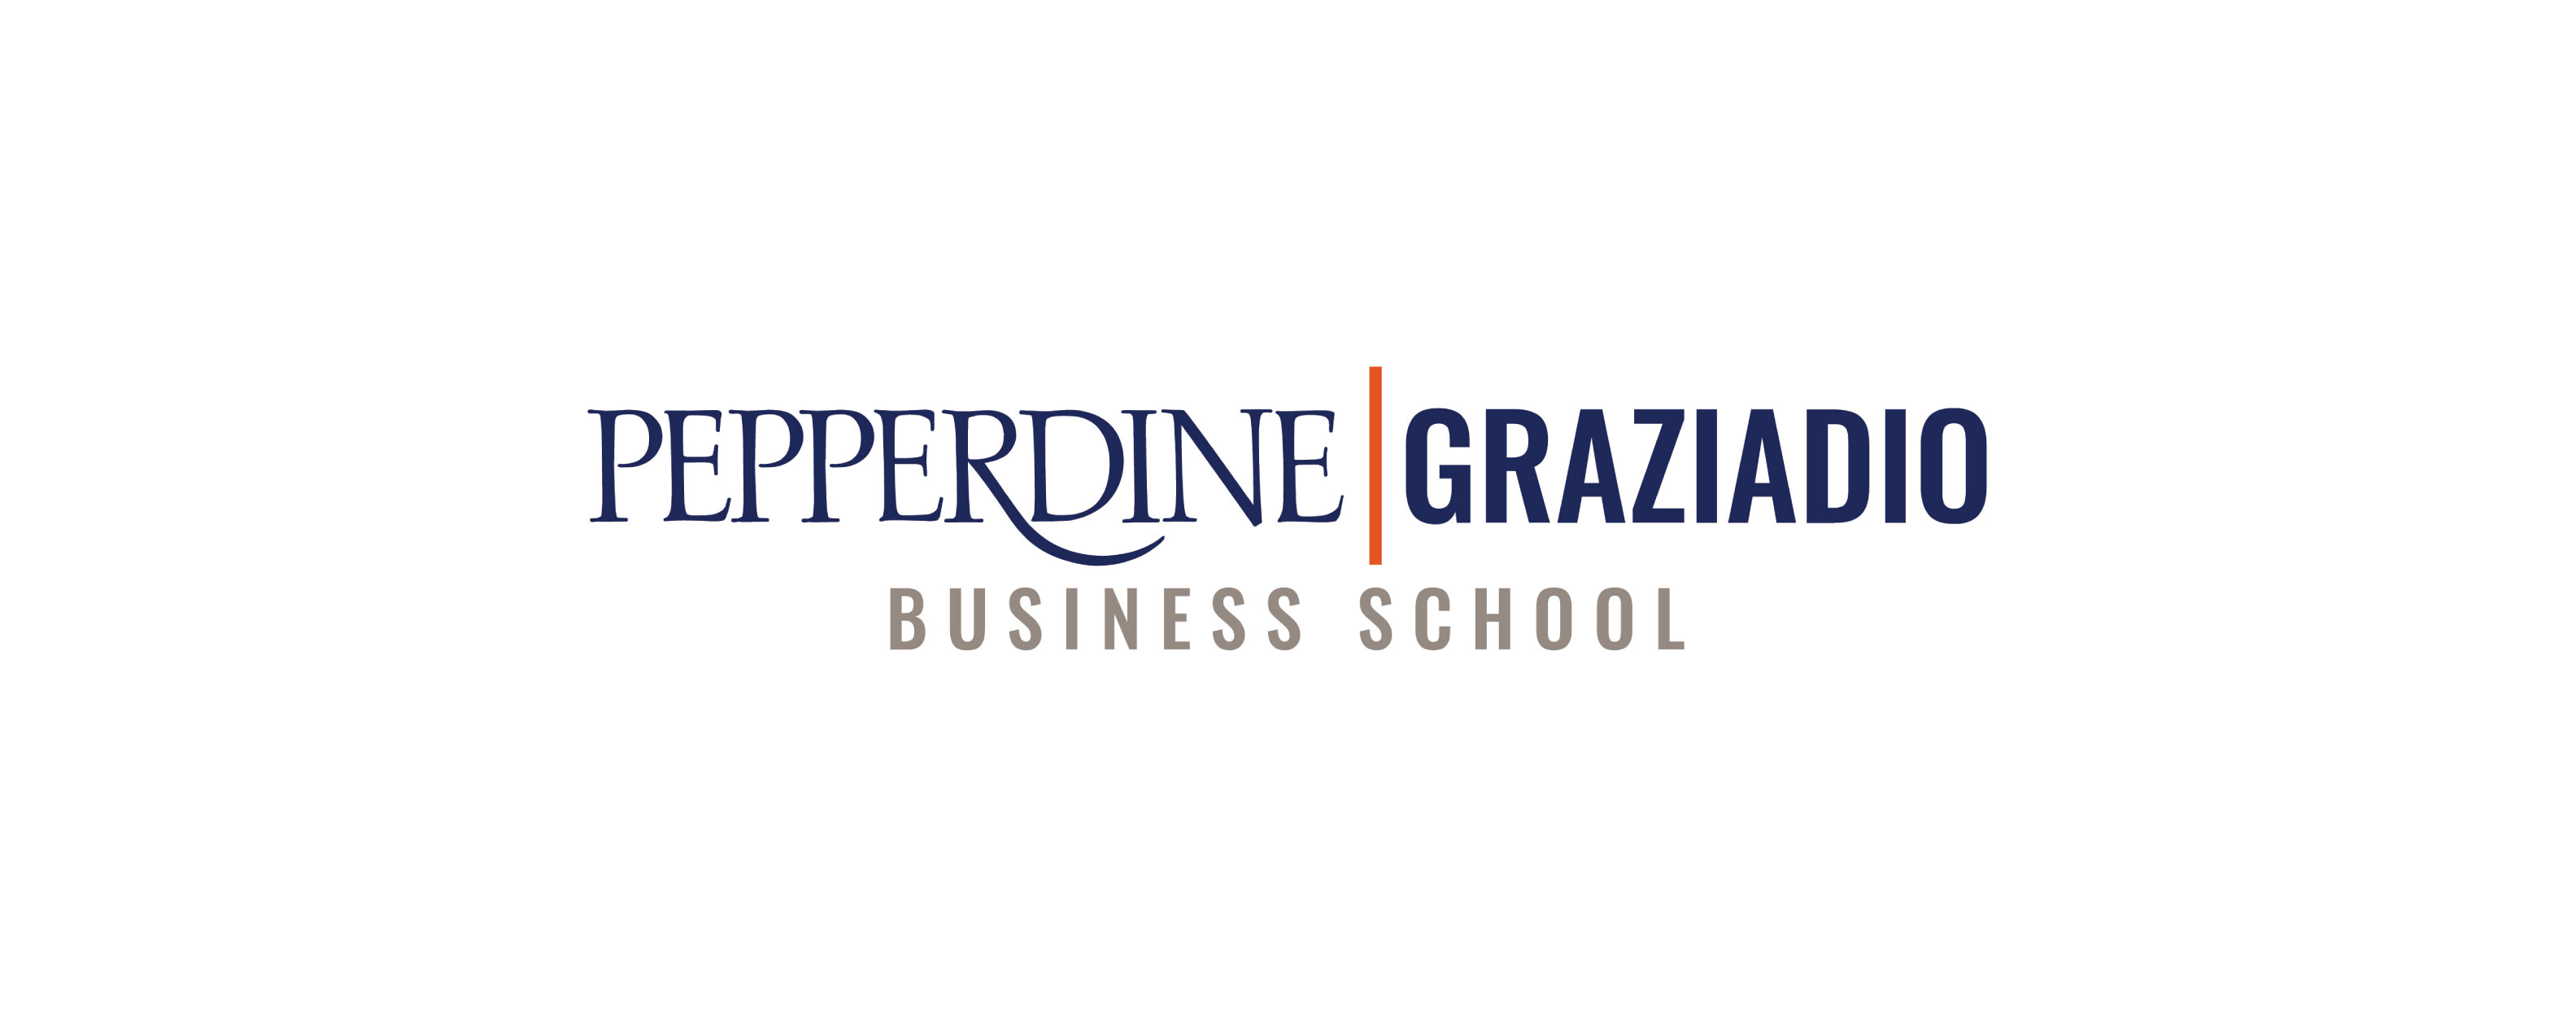 Certificate in Healthcare Analytics Launched by OpusVi and the Pepperdine Graziadio Business School